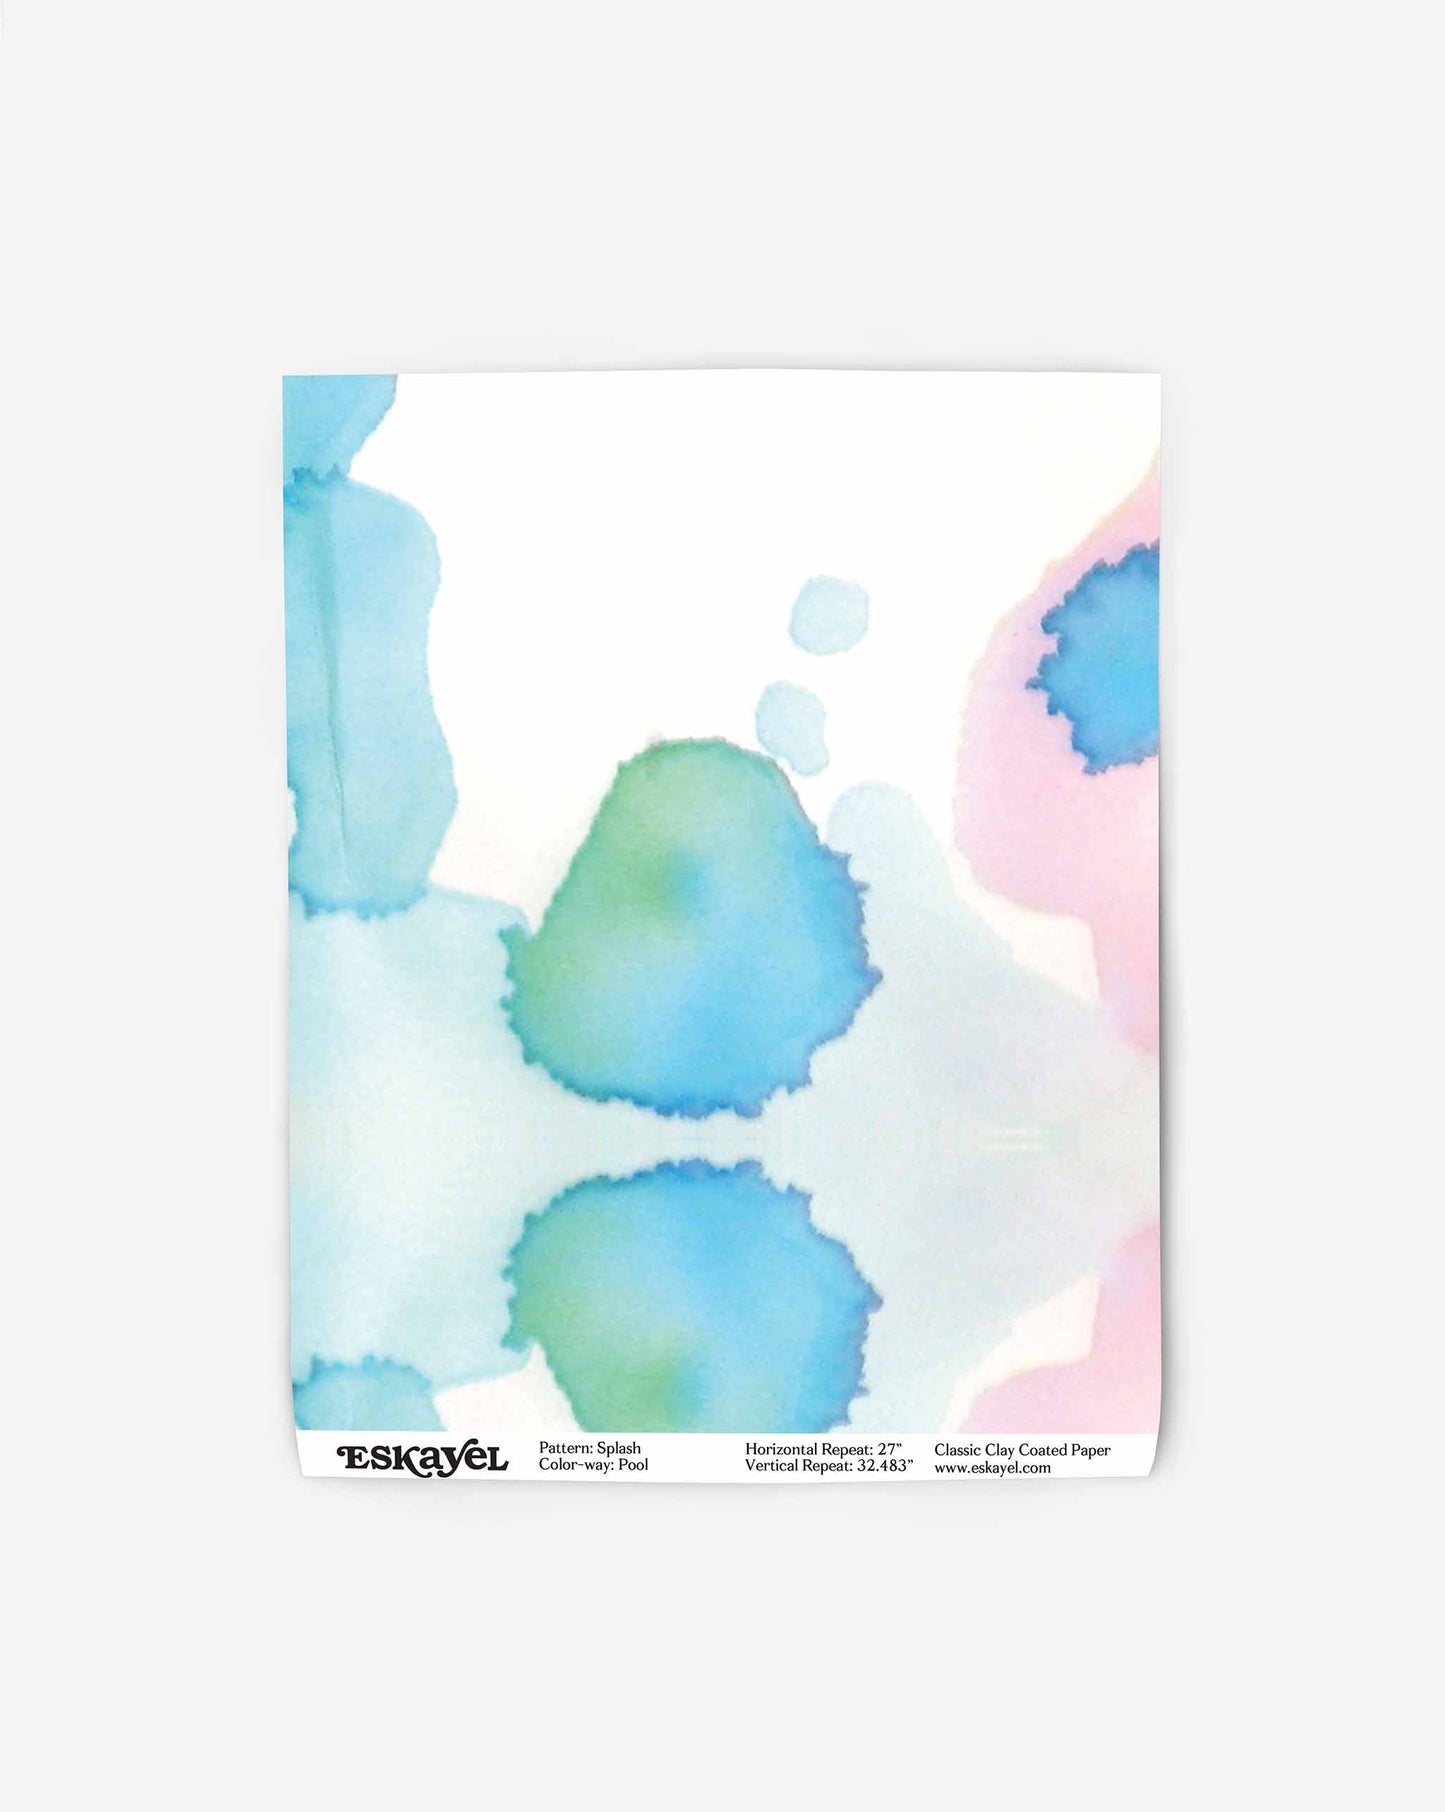 A sheet of paper with colorful watercolor splotches in blue, green, and pink reminiscent of luxurious wallpapers. The paper features the Splash Wallpaper||Pool logo and product details at the bottom.